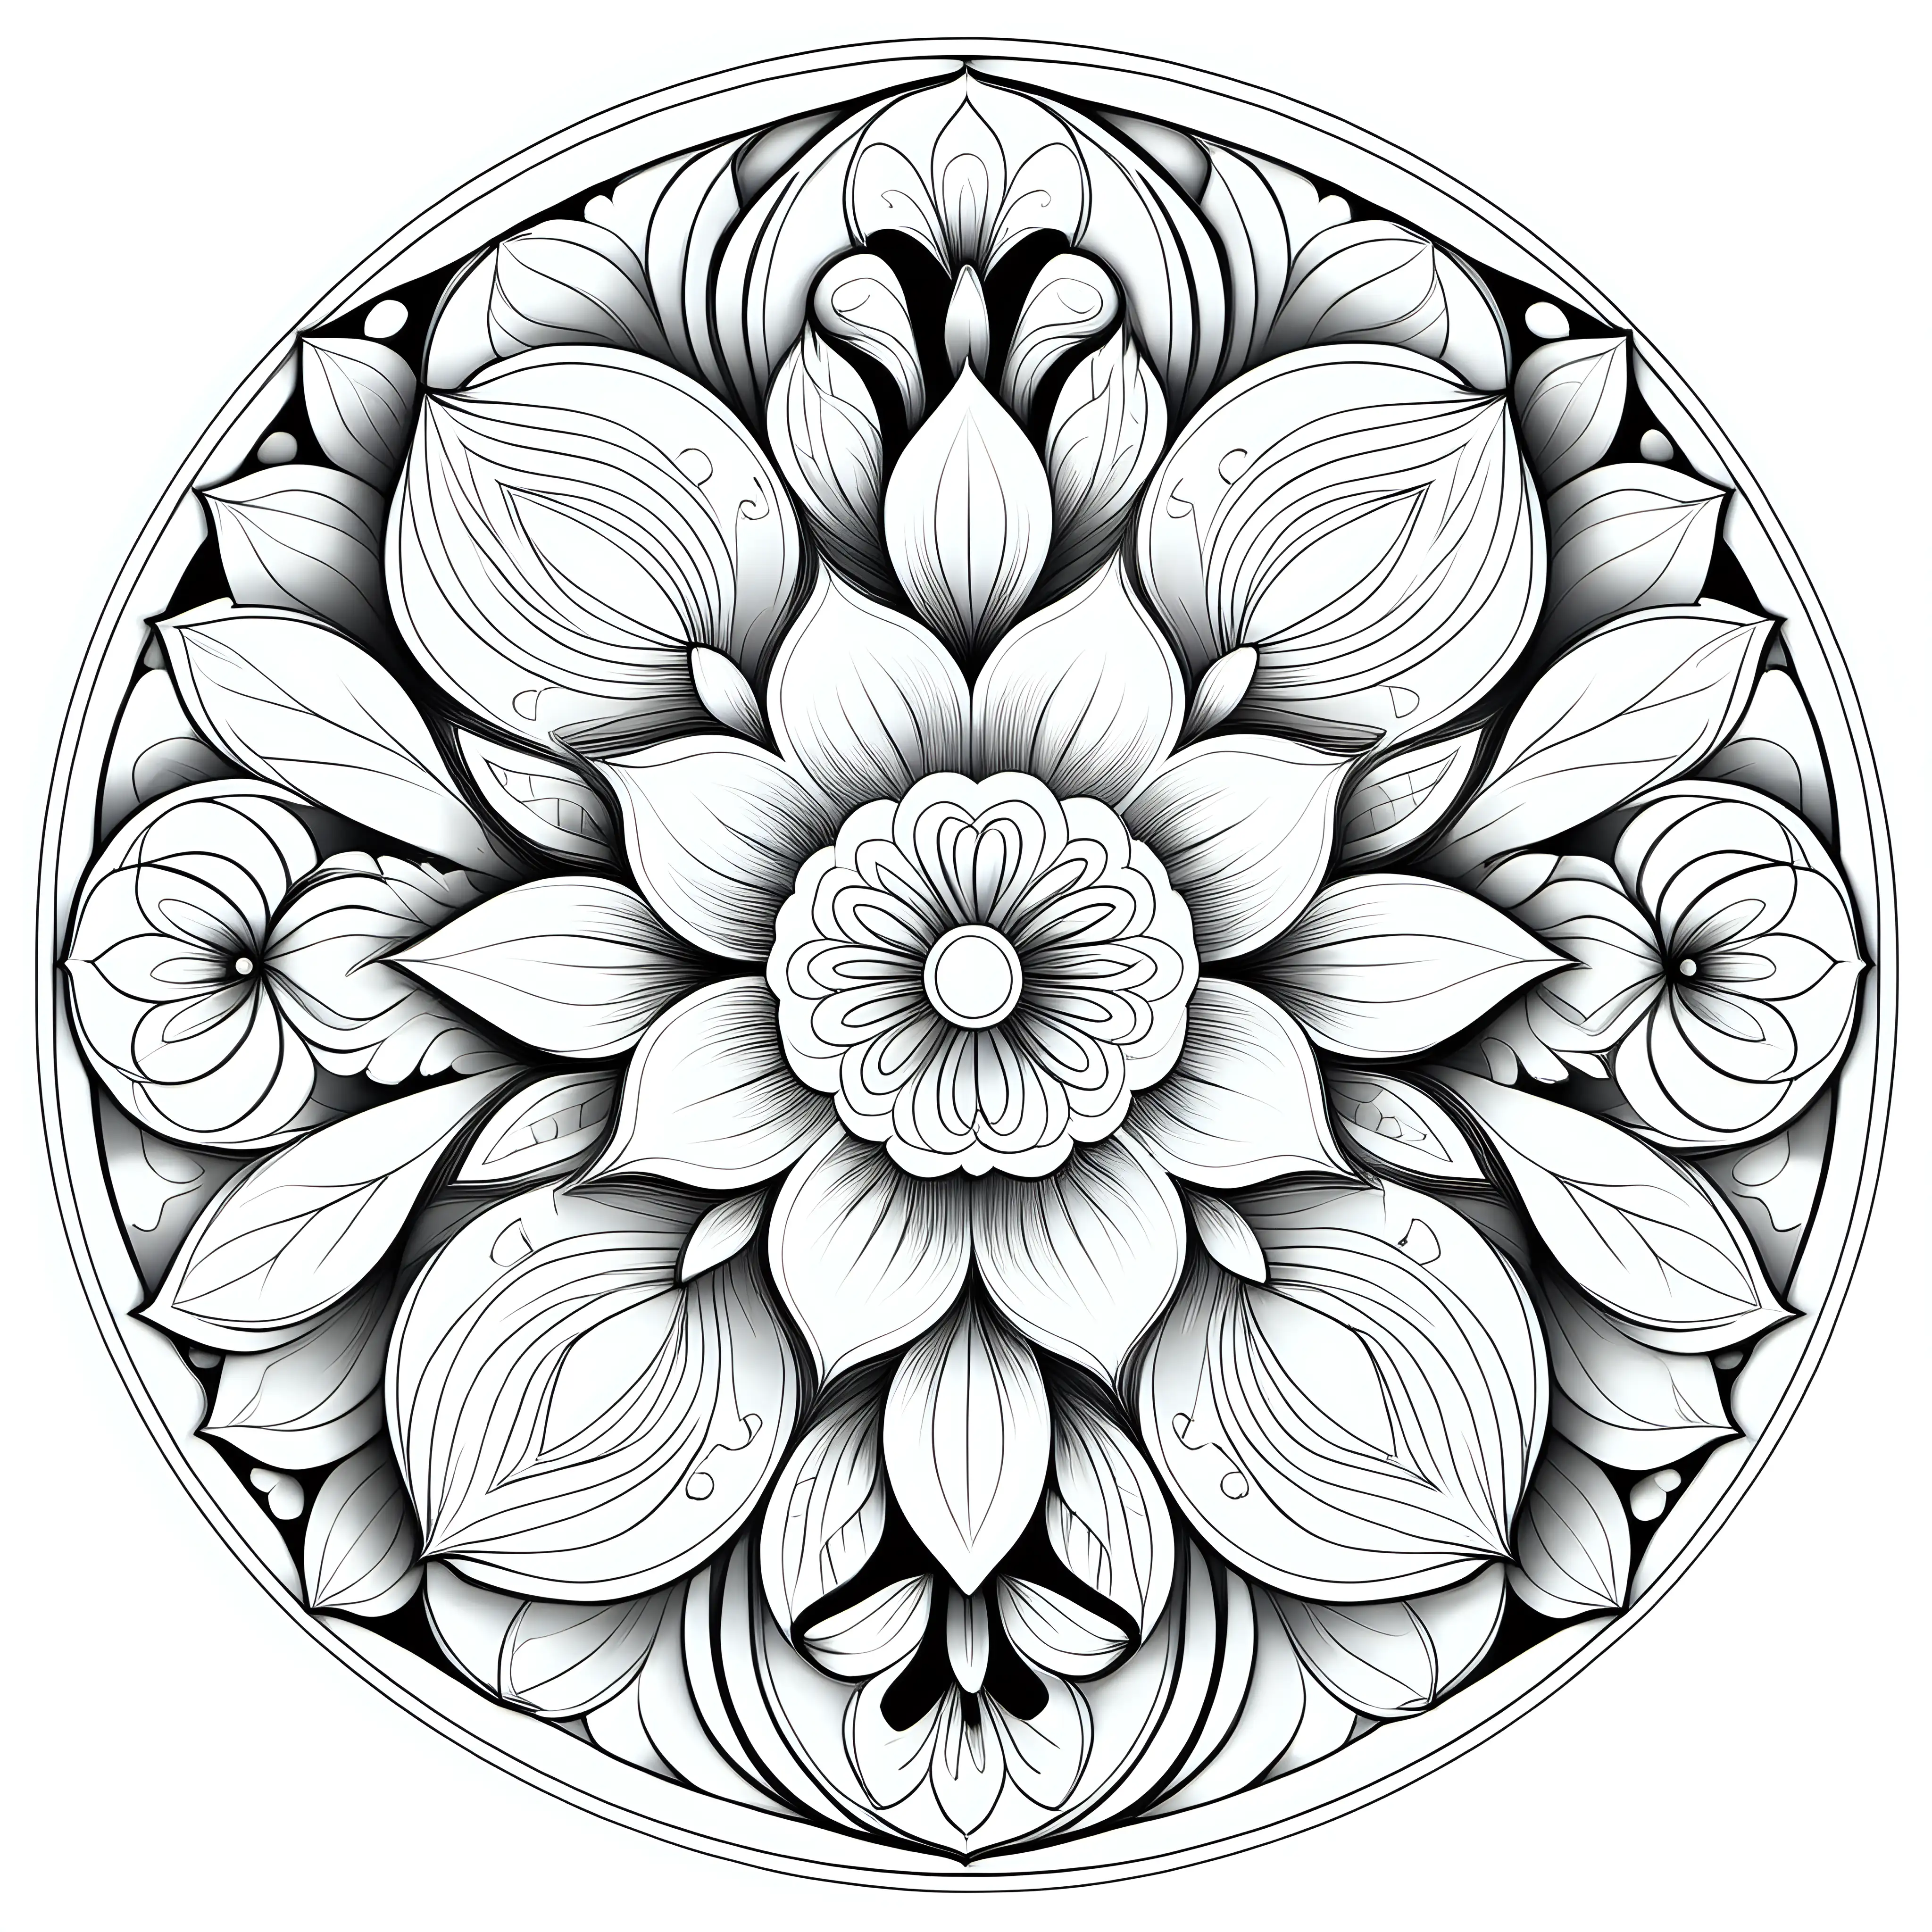 Floral Mandala Coloring Design with Intricate Blossoms